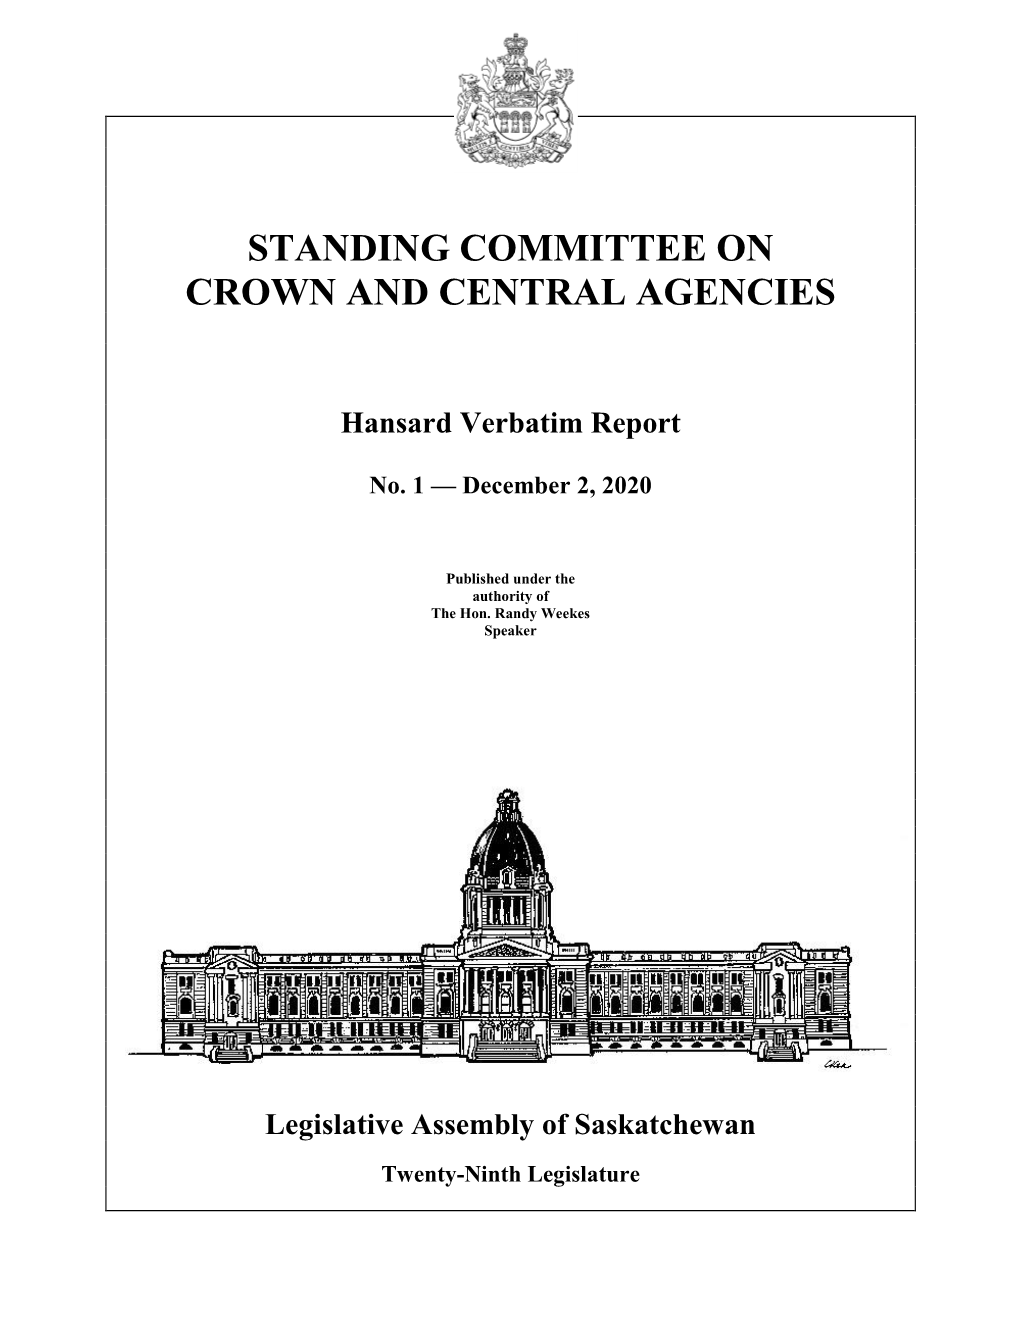 December 2, 2020 Crown and Central Agencies Committee